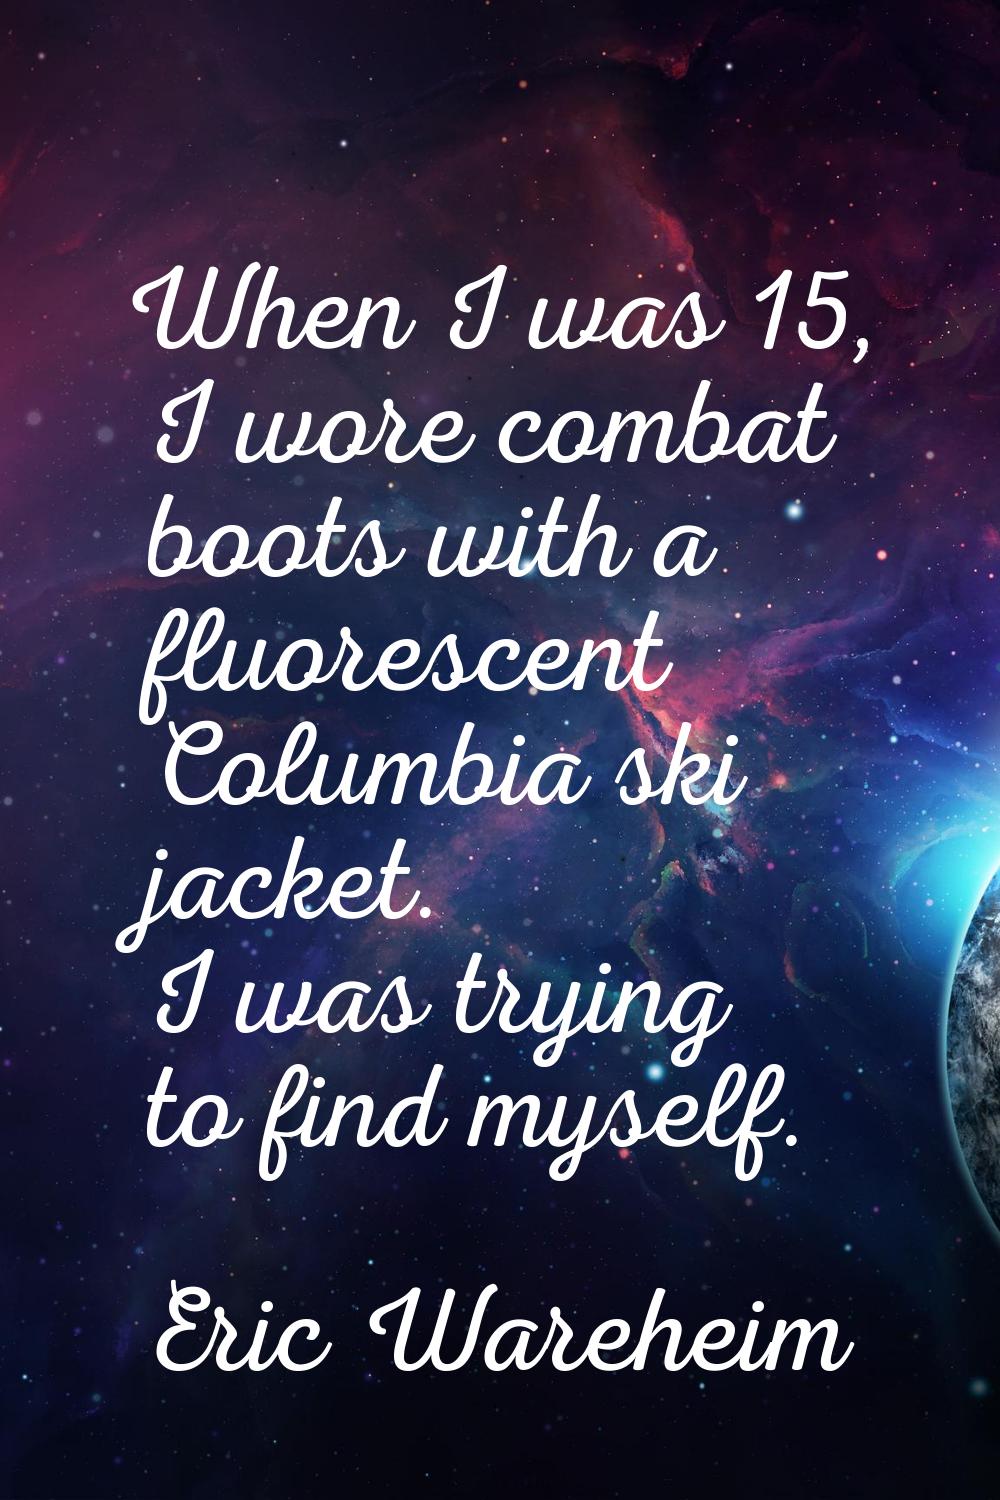 When I was 15, I wore combat boots with a fluorescent Columbia ski jacket. I was trying to find mys